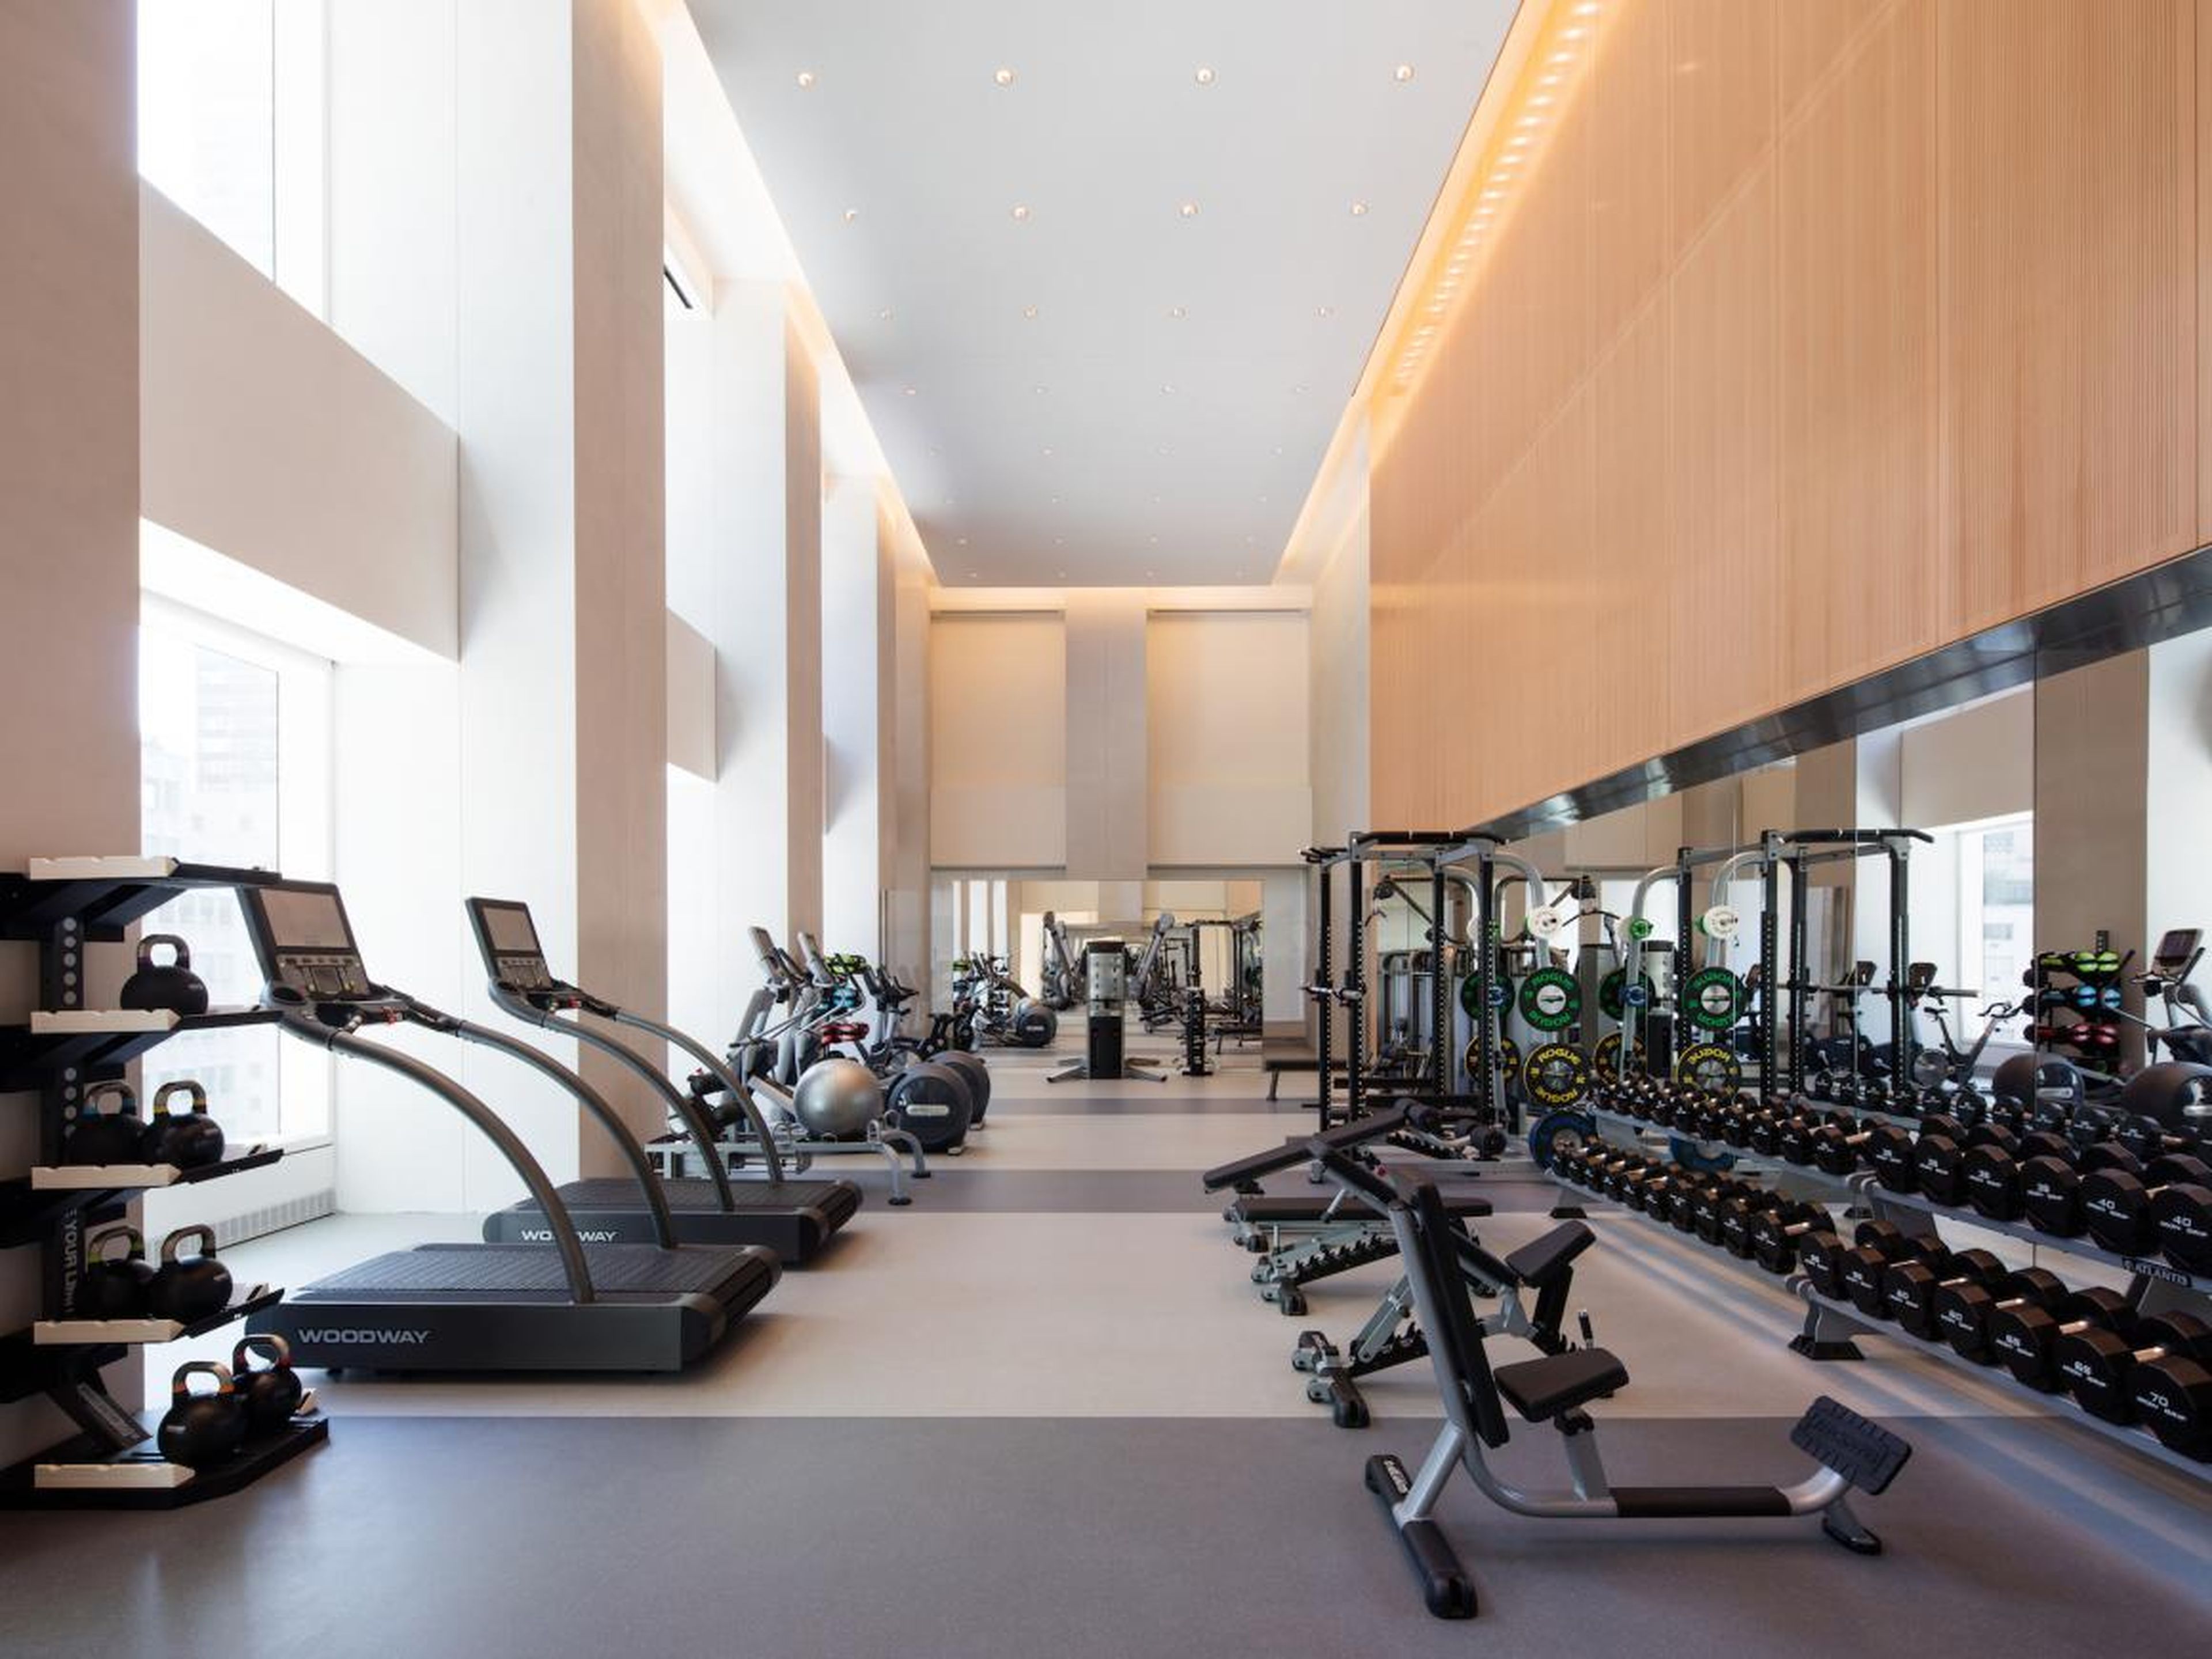 432 Park Avenue includes its own fitness center — a standard amenity in luxury buildings.